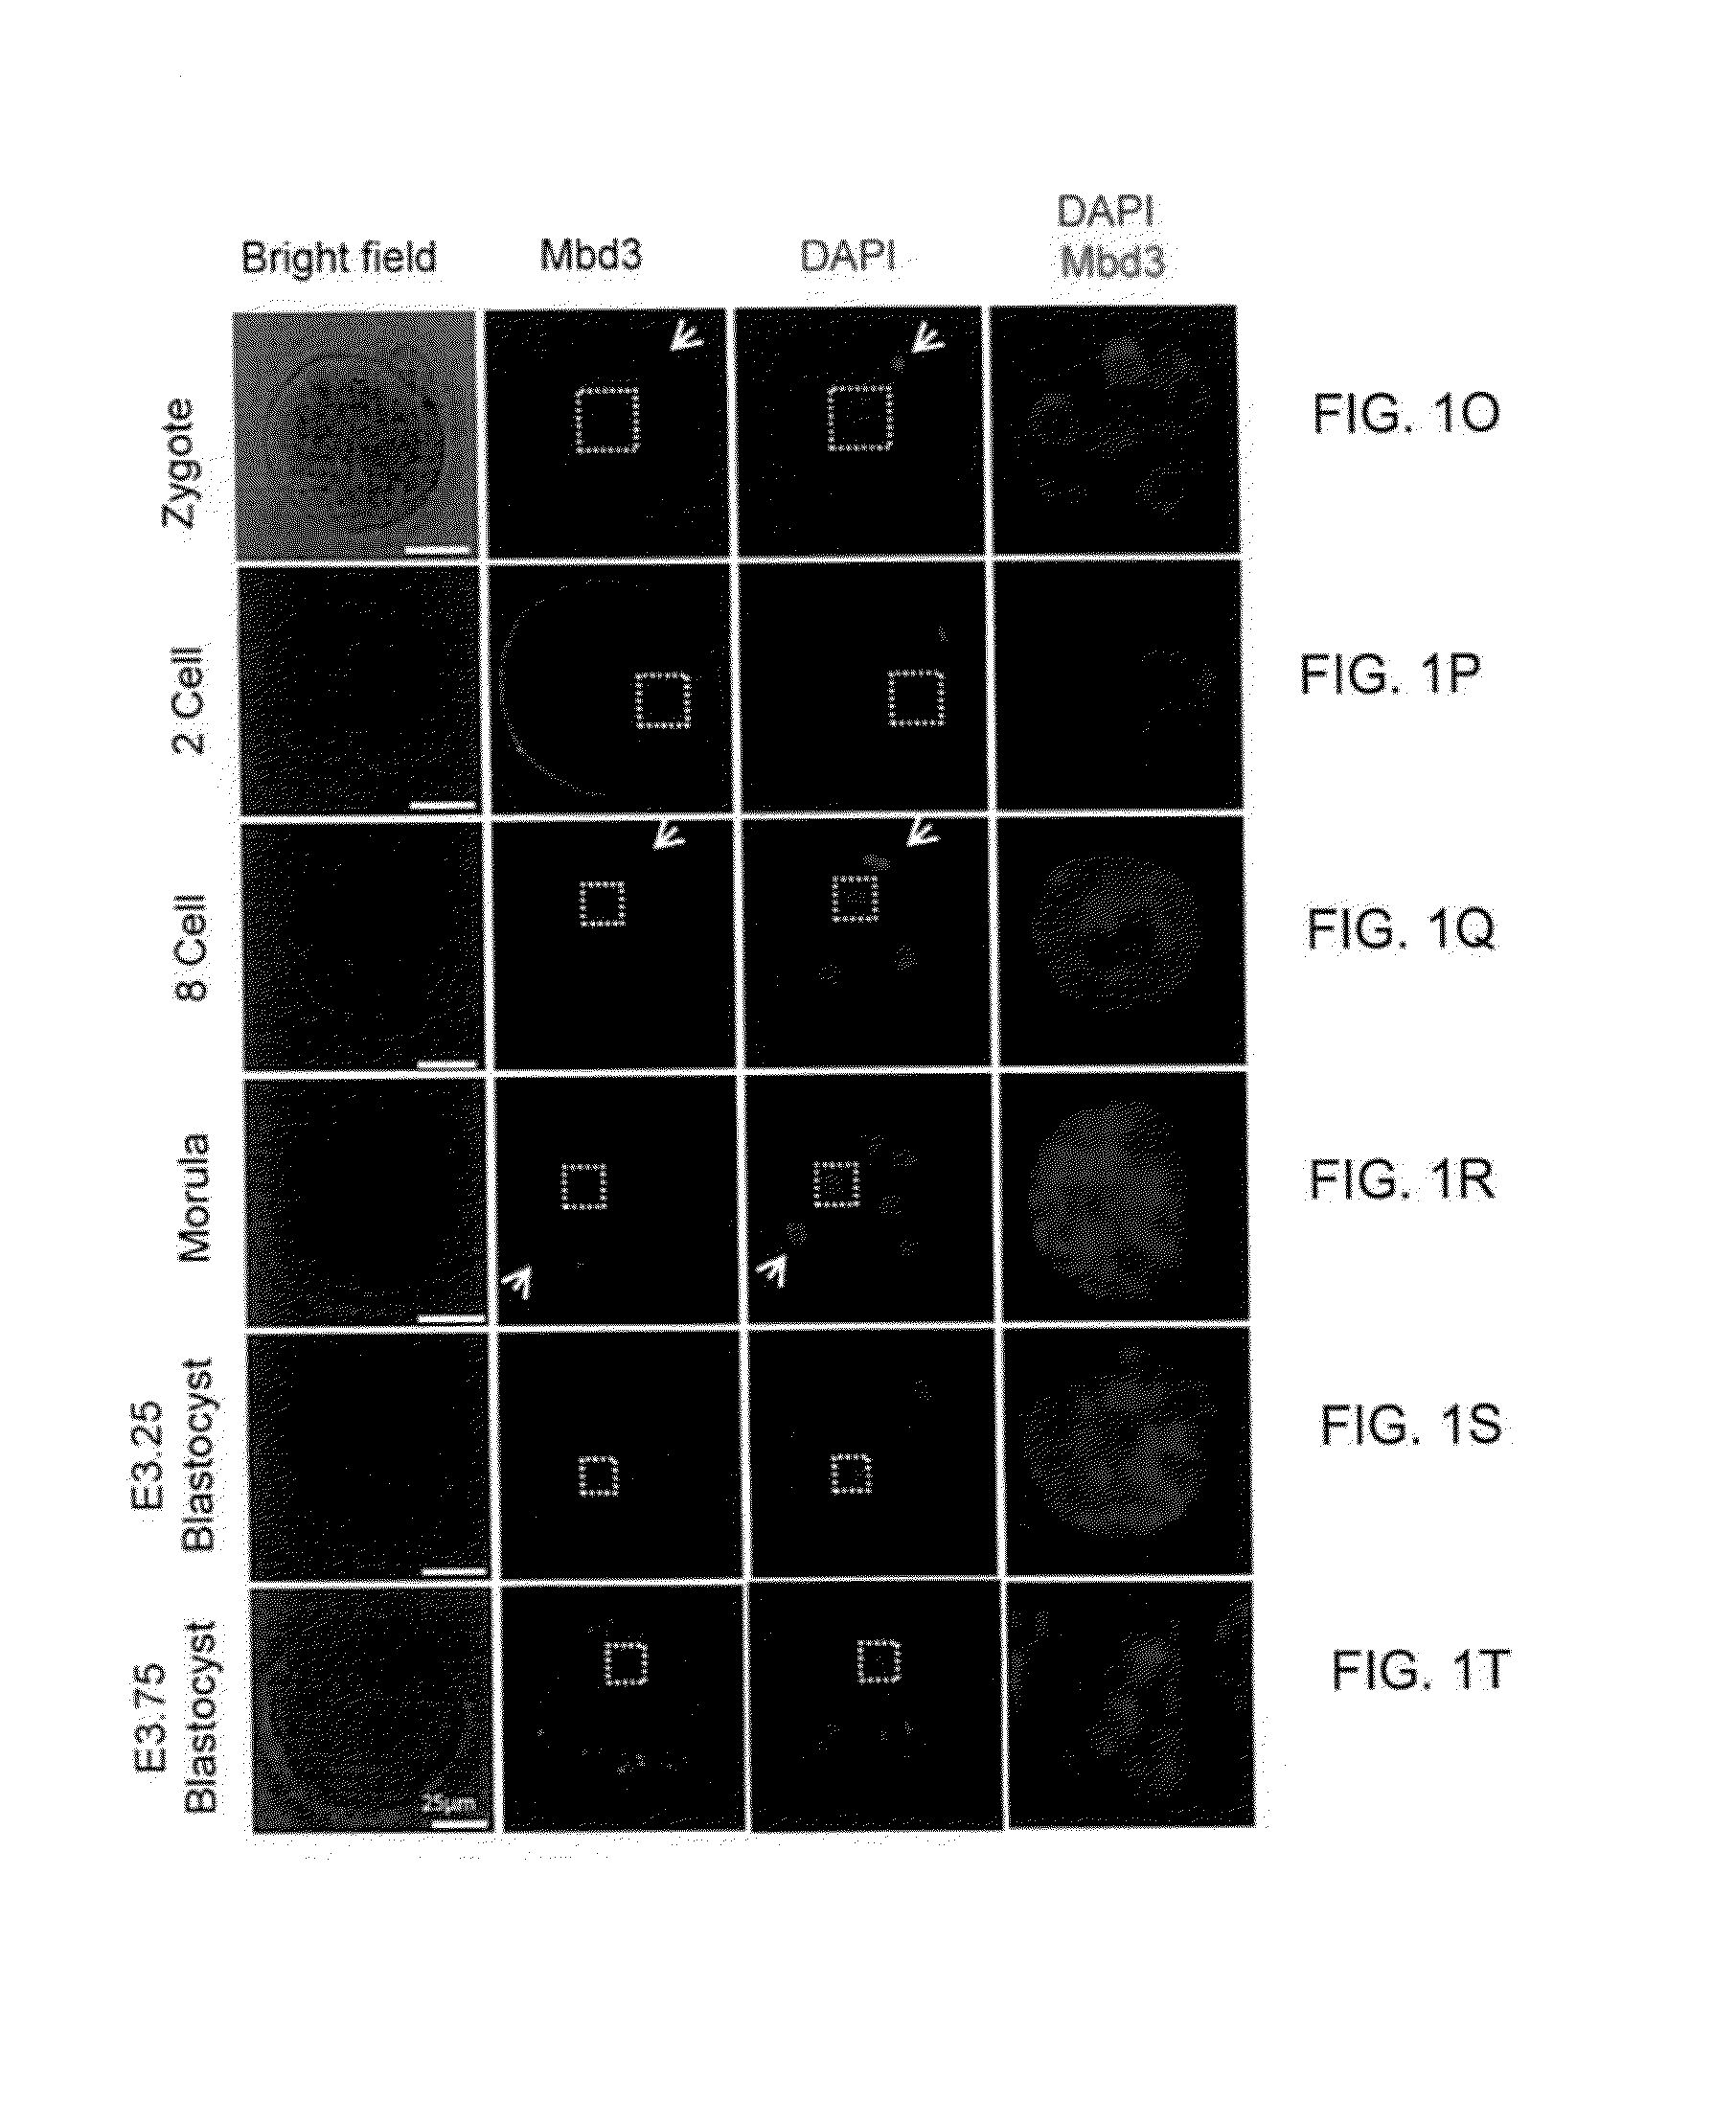 Isolated naive pluripotent stem cells and methods of generating same